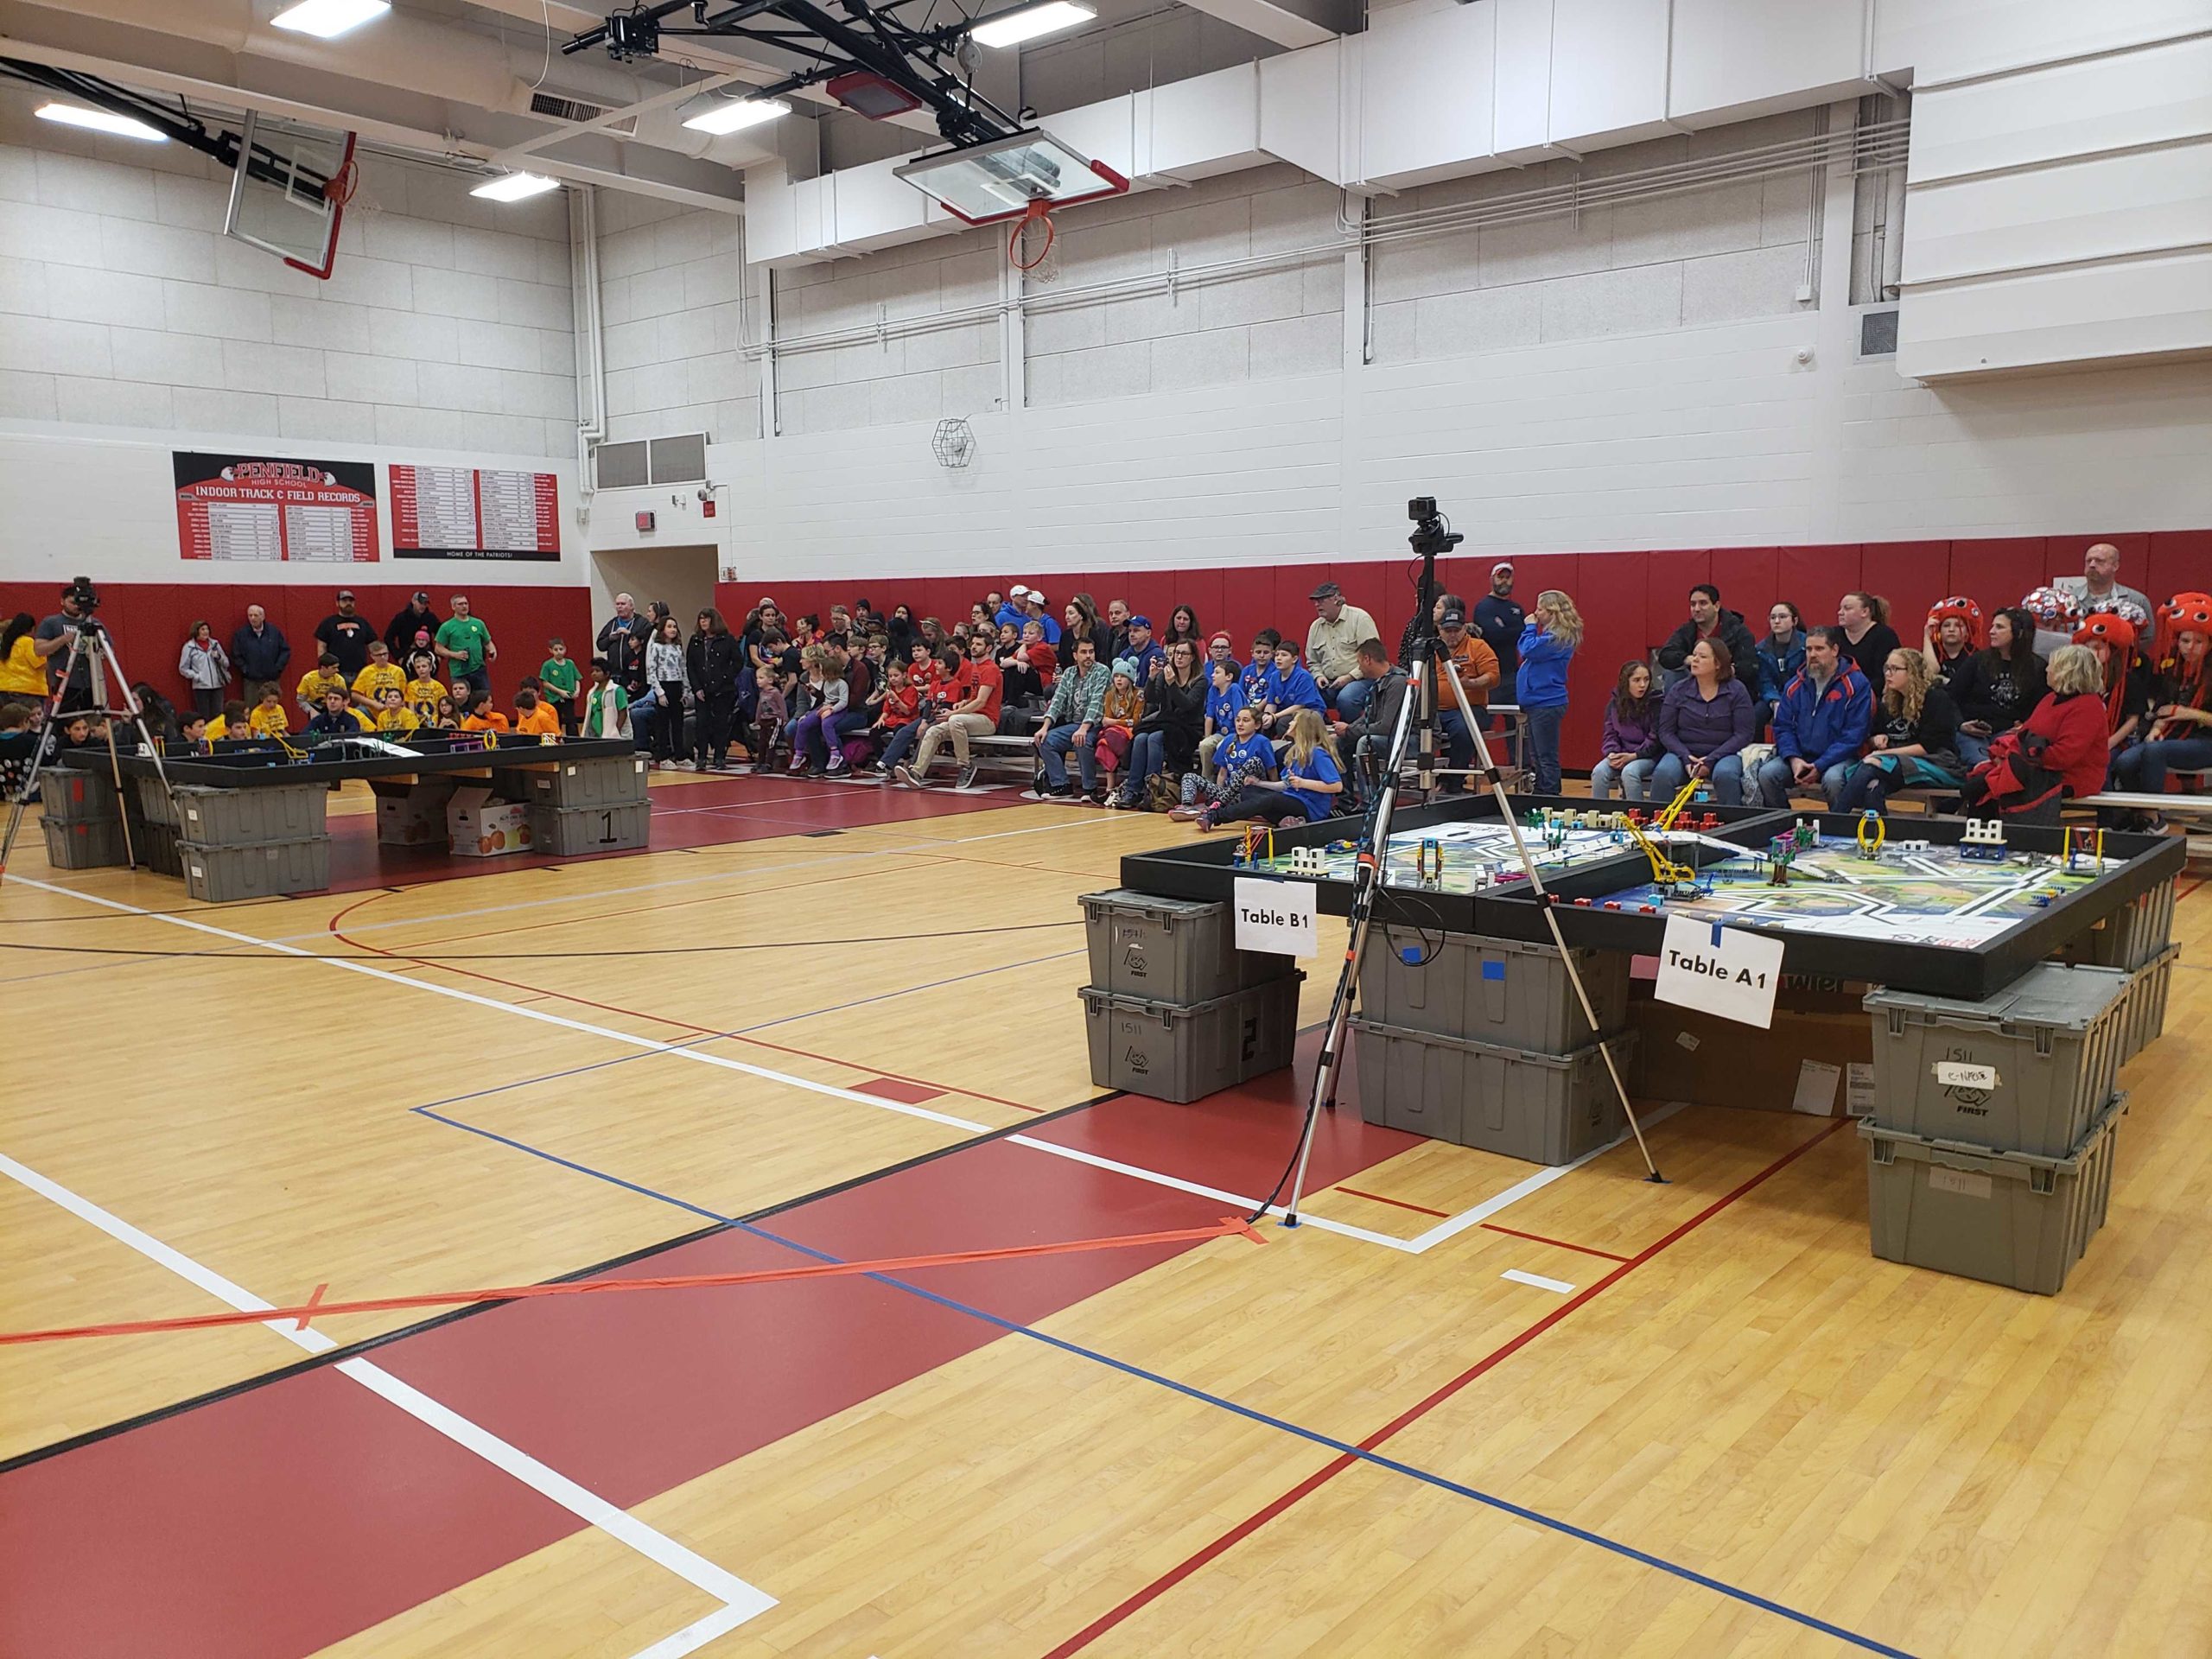 A gymnasium filled with FLL robotics teams, playing fields and spectators